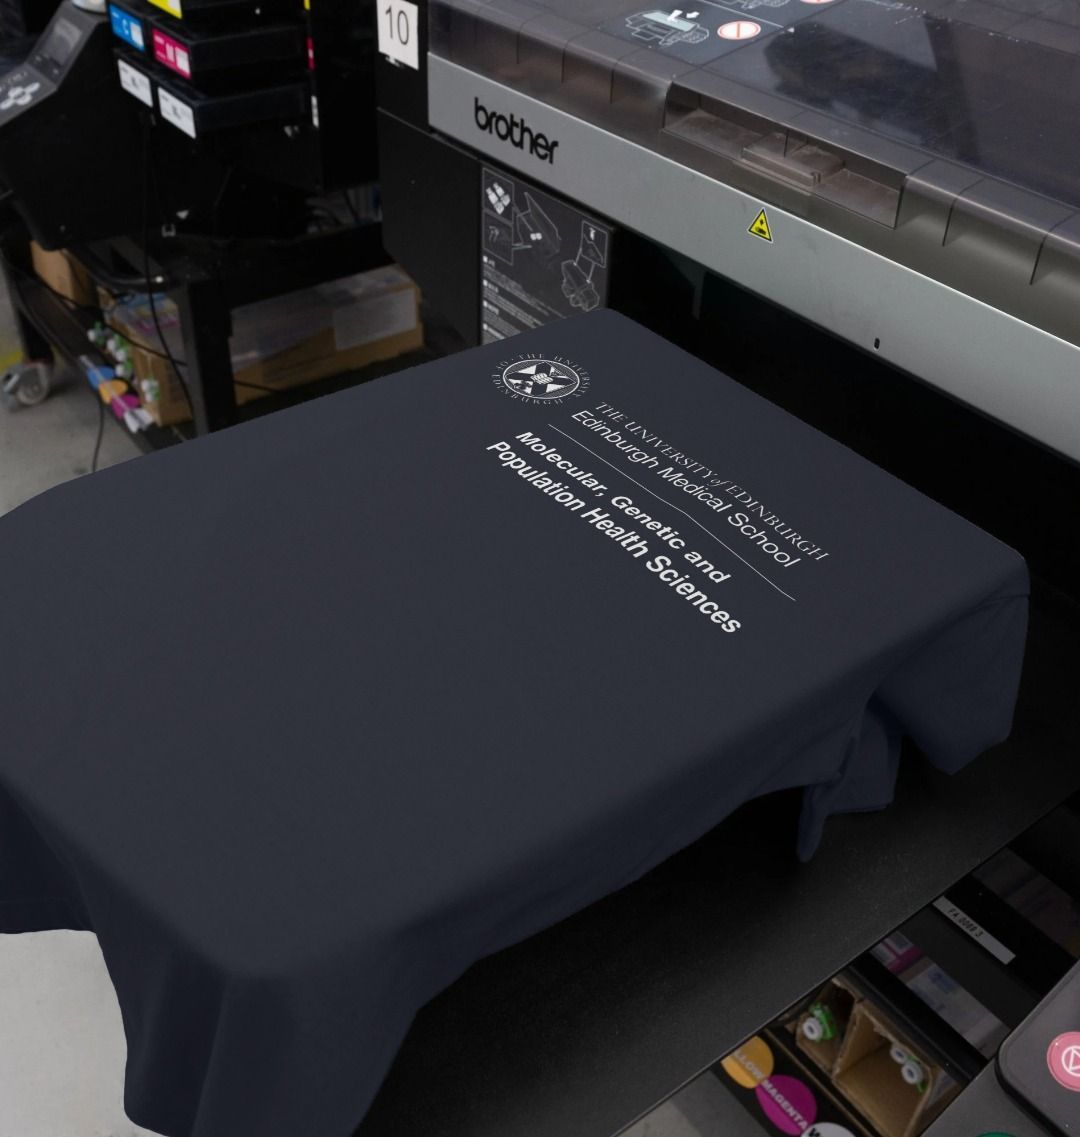 Our Edinburgh Medical School -Molecular, Genetic and Population Health Sciences T- shirt being printed by our print on demand partner, teemill